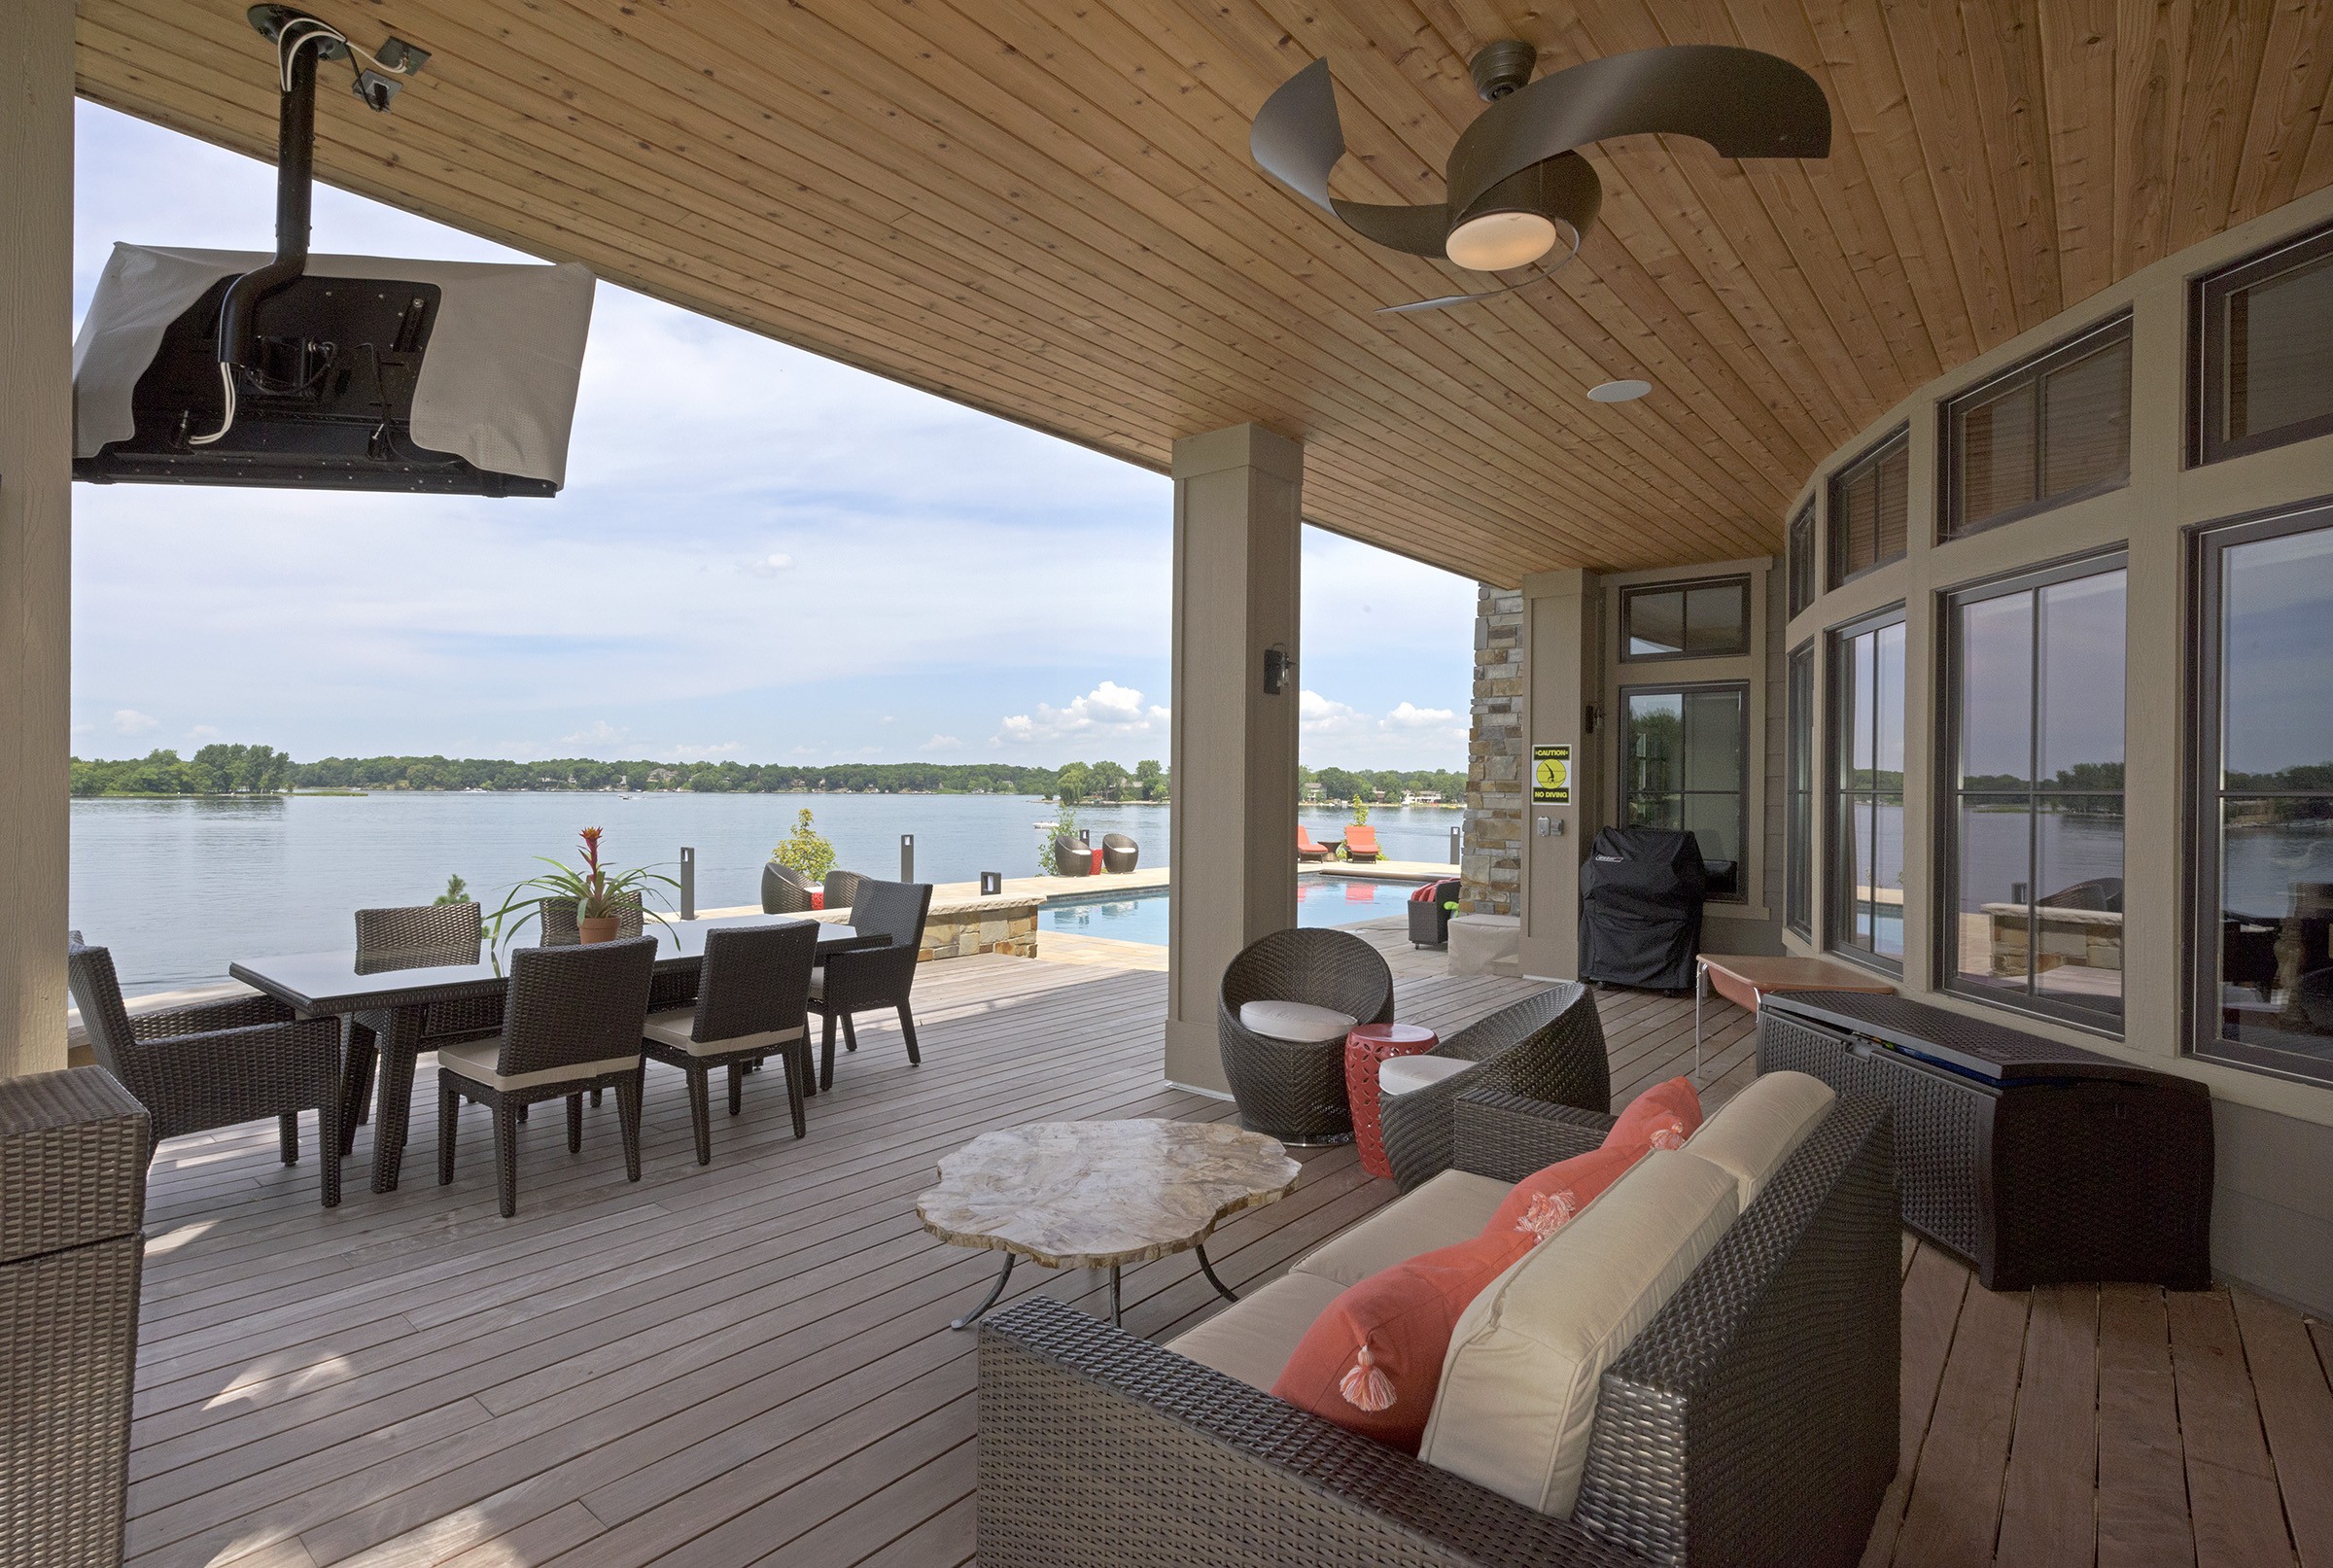 A deck with furniture and a view of a lake.